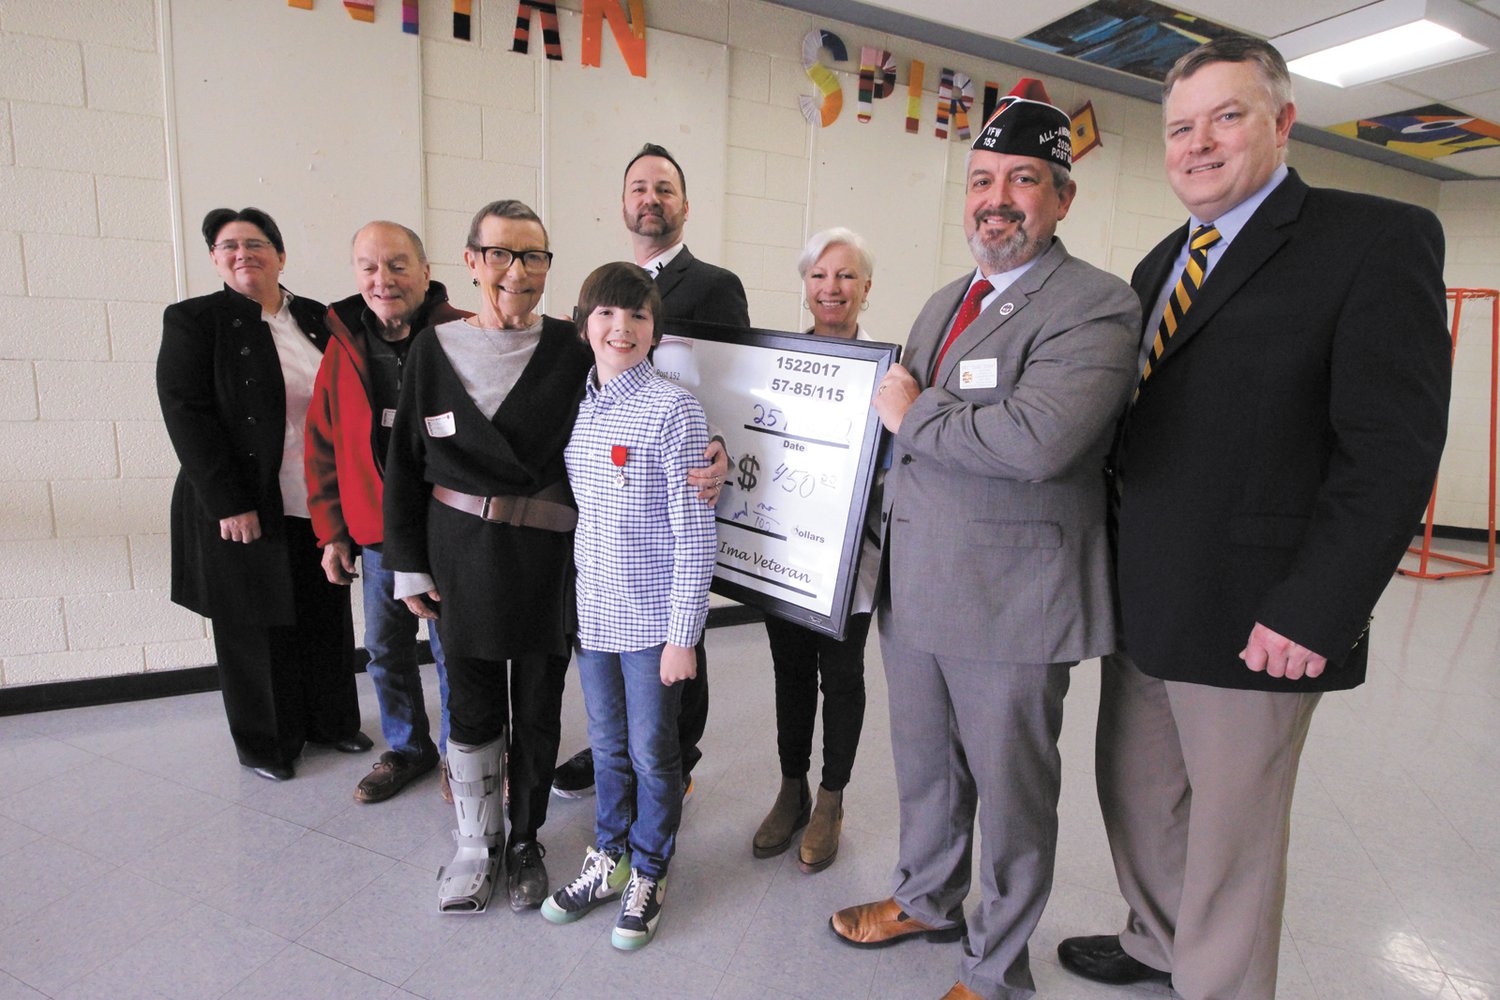 STATE ESSAY WINNER:  Winman Middle School seventh grader Harry Fallon, center, was honored last week by the VFW for his winning essay on “What makes a good America.” He is pictured with from left: Judith Cobden, chair of the Warwick School Committee; his grandparents, Anthony and Asa Orsino; Winman Principal Adam Heywood, his mother Samantha Fallon; RI representative on the VFW National Board of Directors Eric Dukat and Assistant Superintendent William McCaffrey. (Warwick Beacon photo)